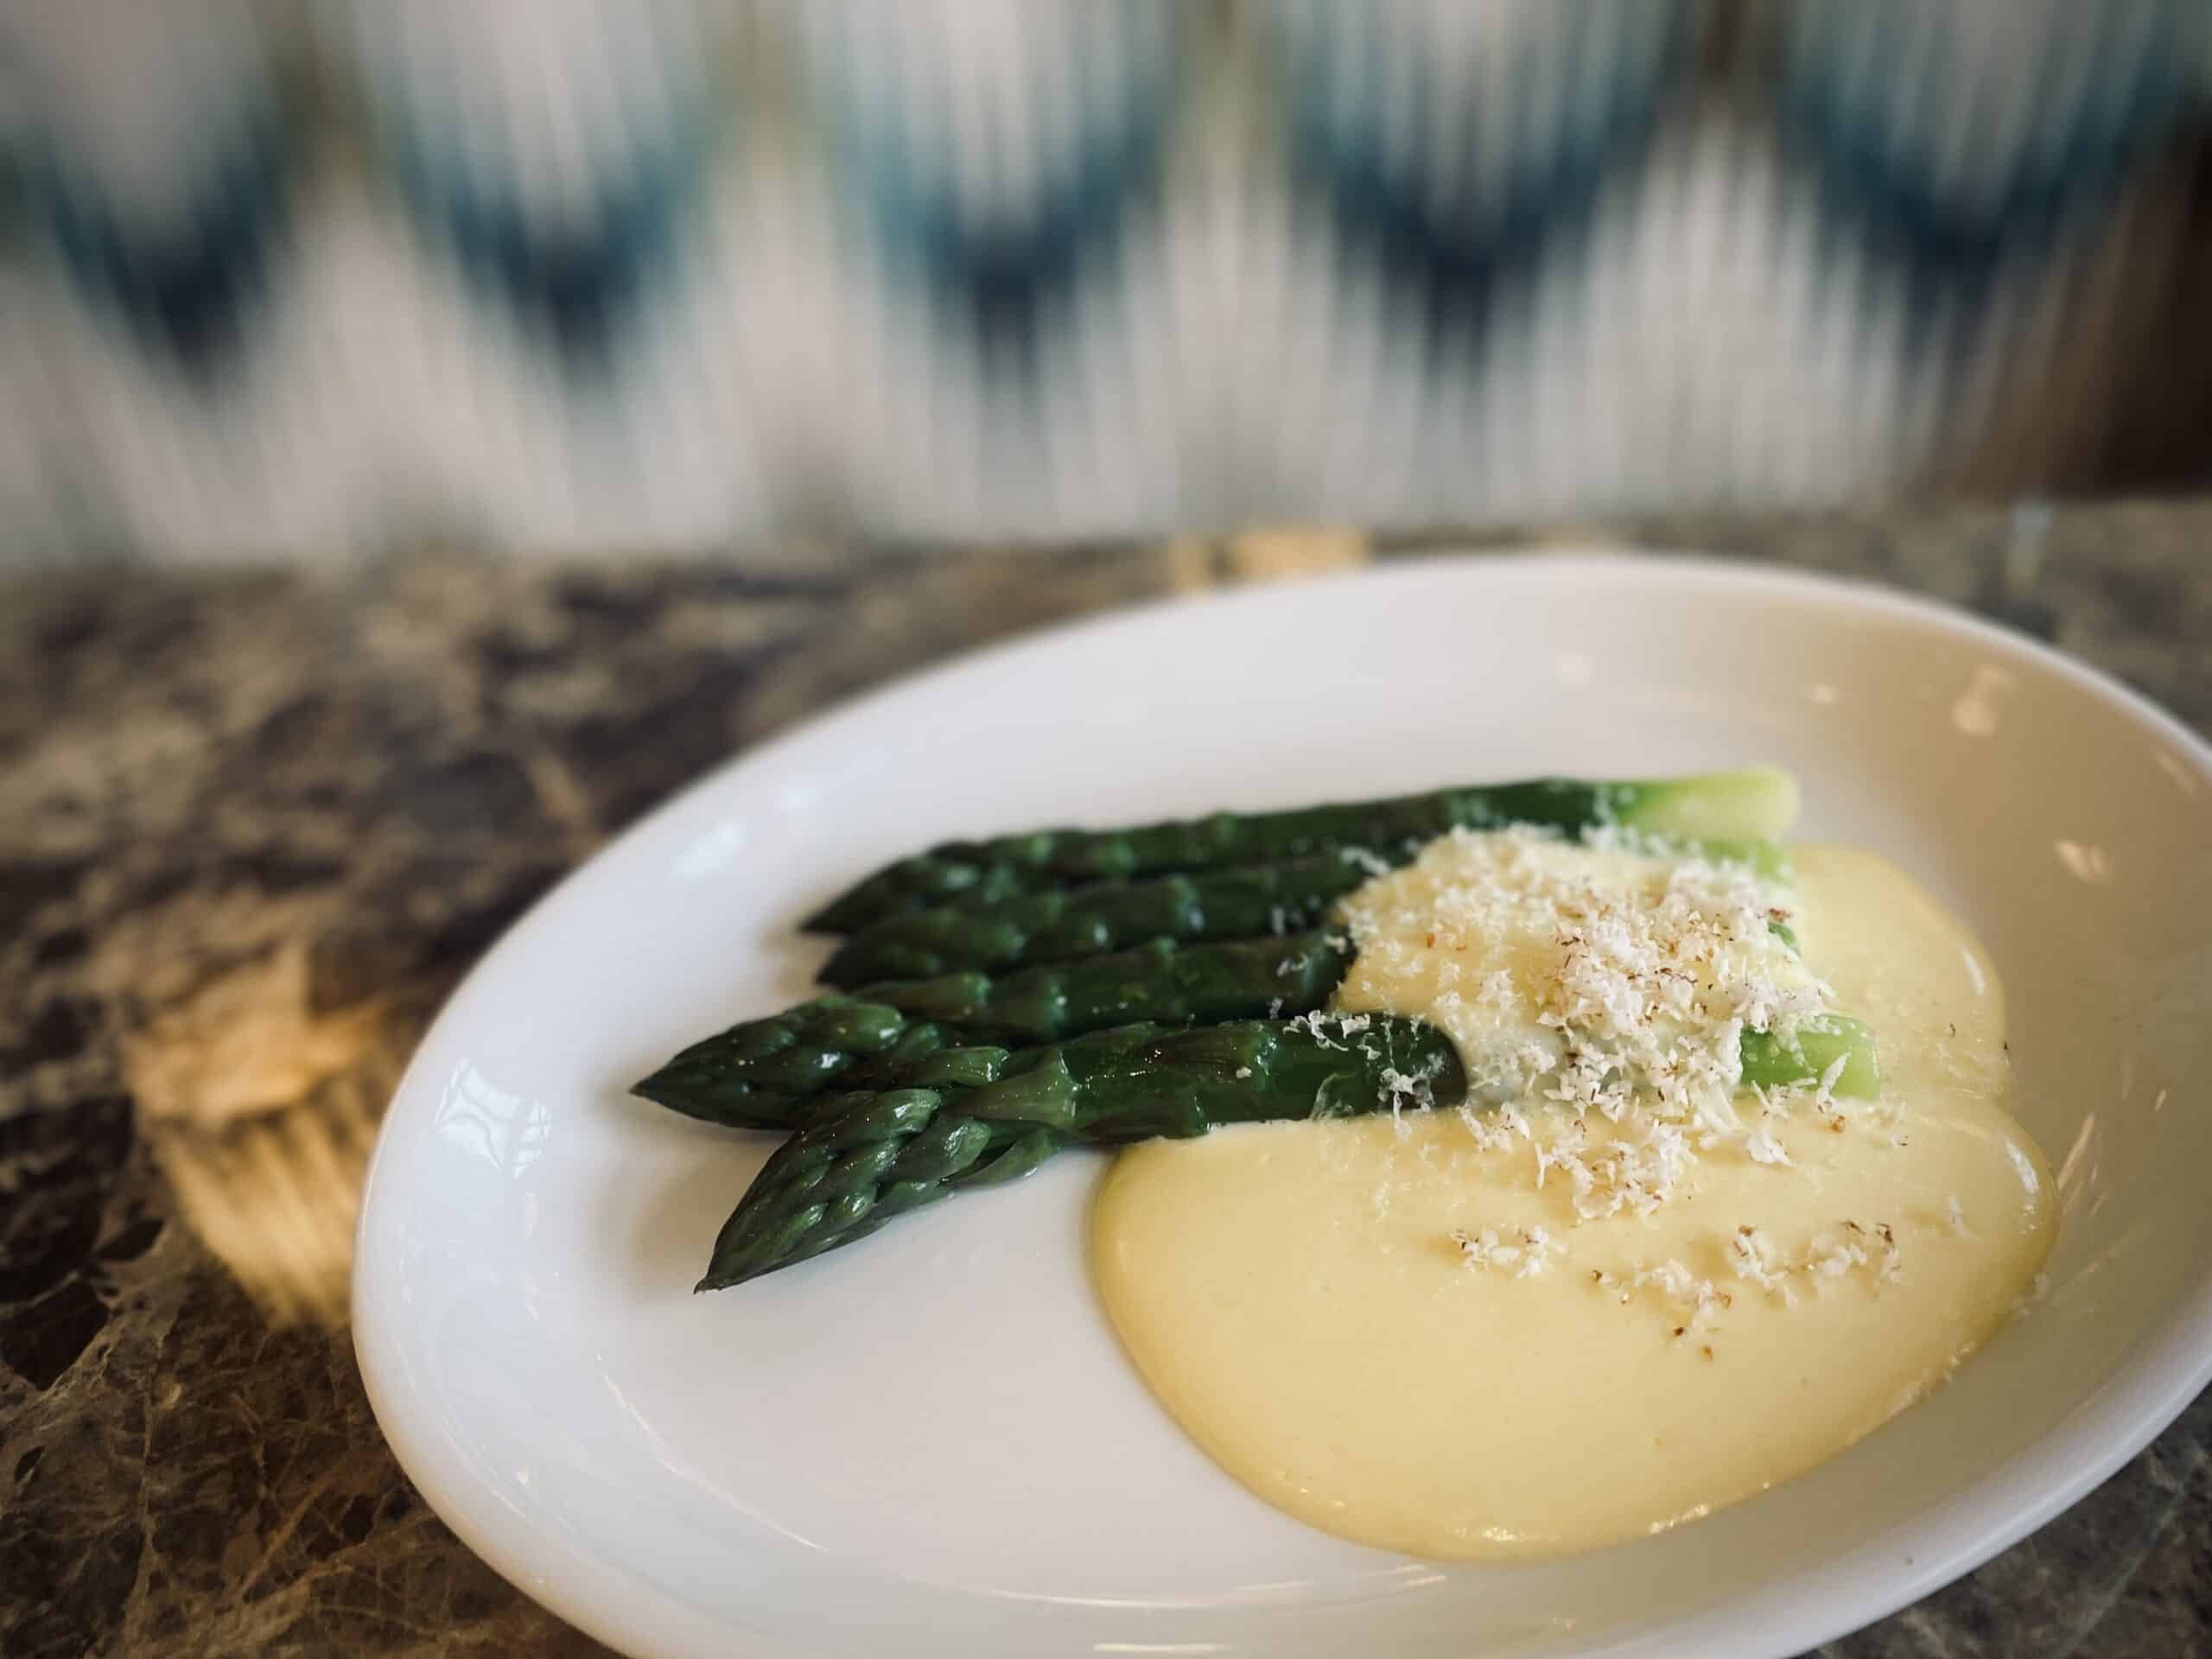 Asparagus blanched and presented on plate